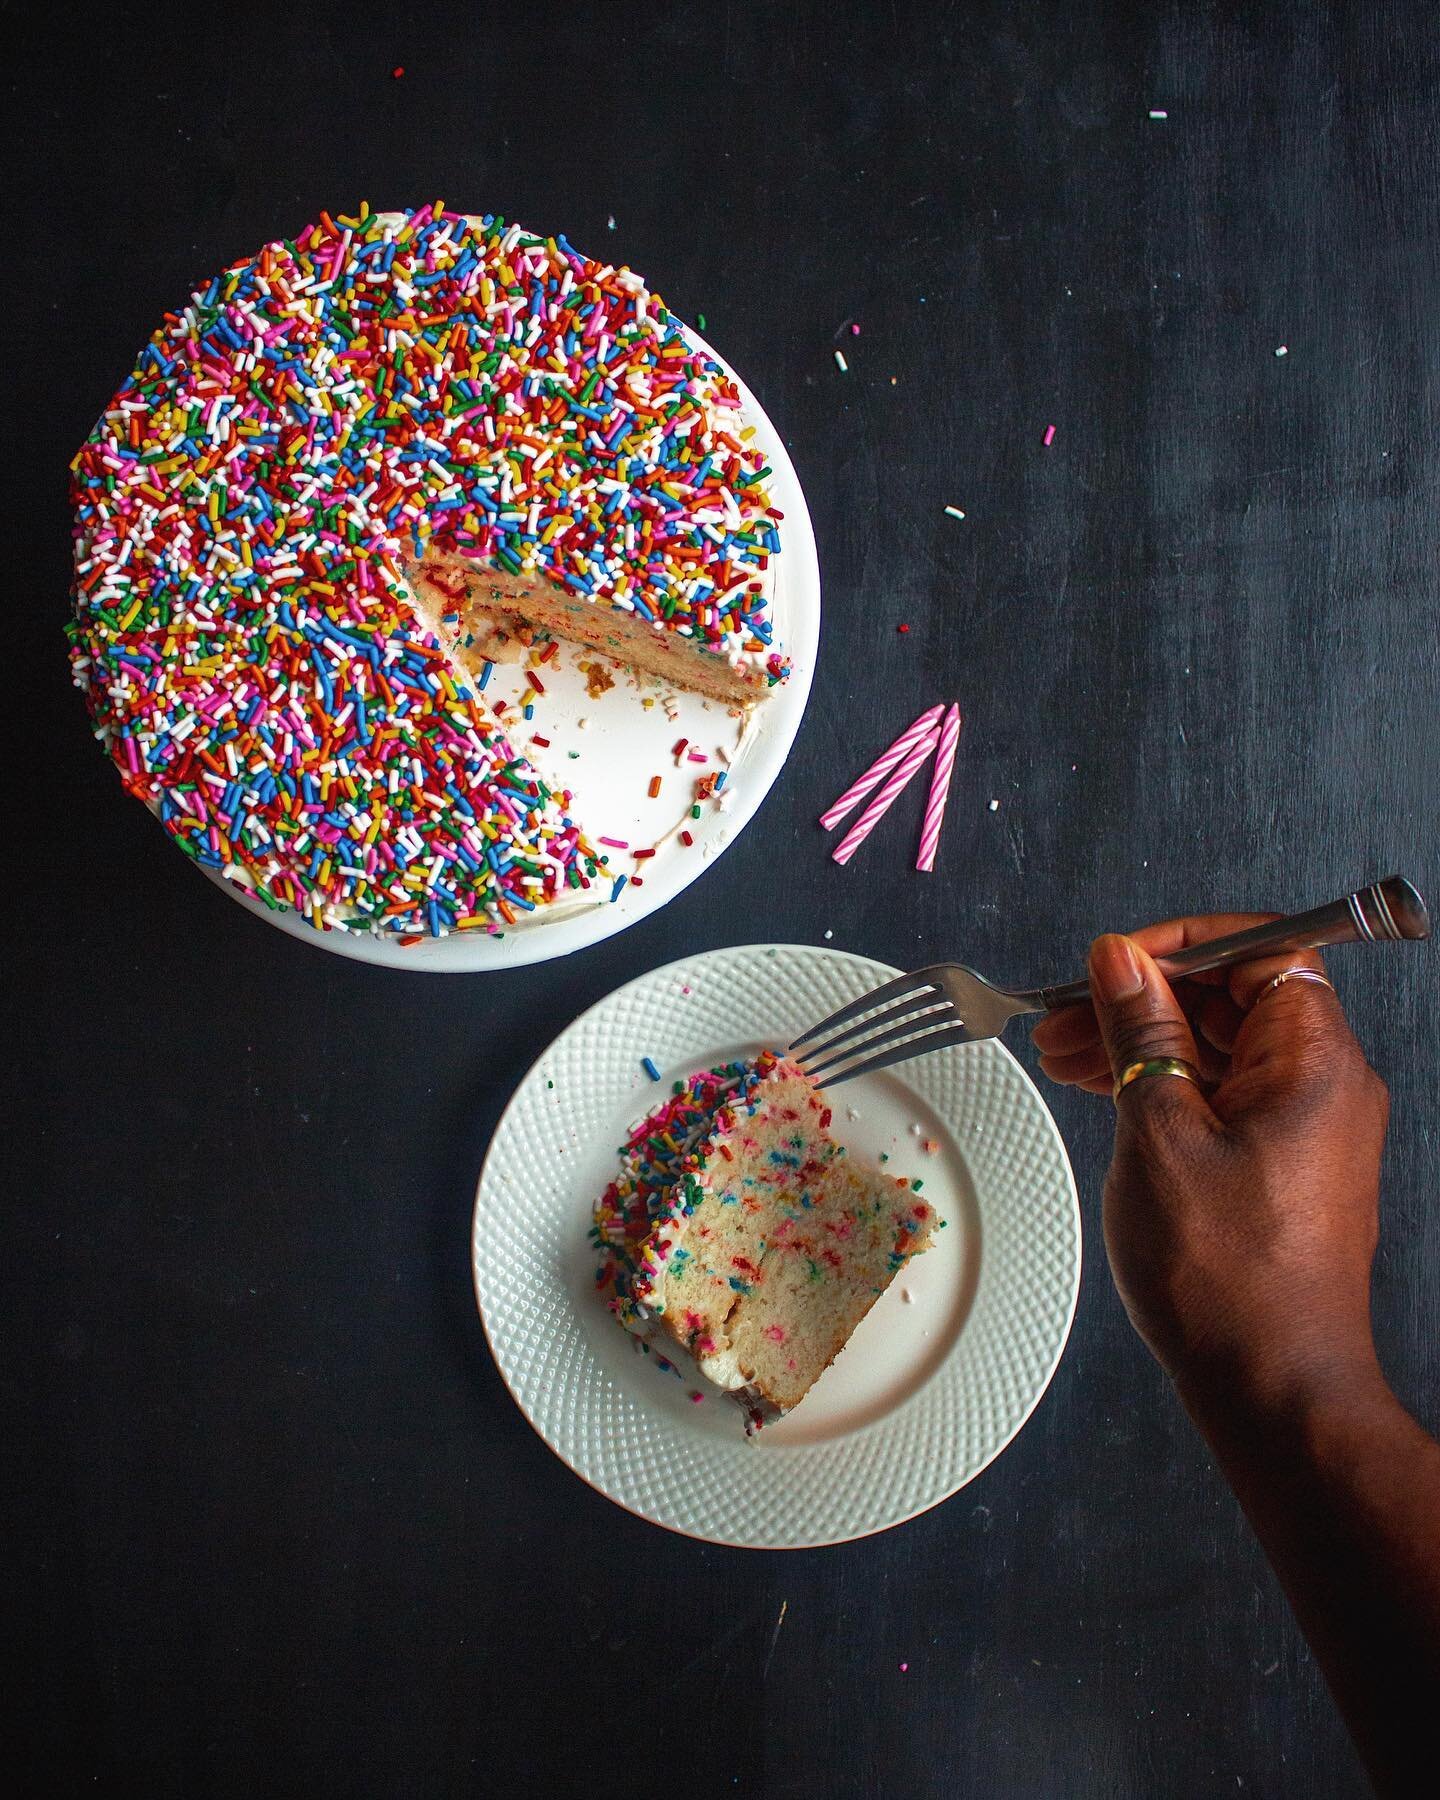 I never considered myself a &ldquo;sprinkles person&rdquo; until I ended up with a free tub of it, and naturally made a funfetti cake with sprinkles covering every possible surface💫 celebrating the end of my third year of med school - your favorite 